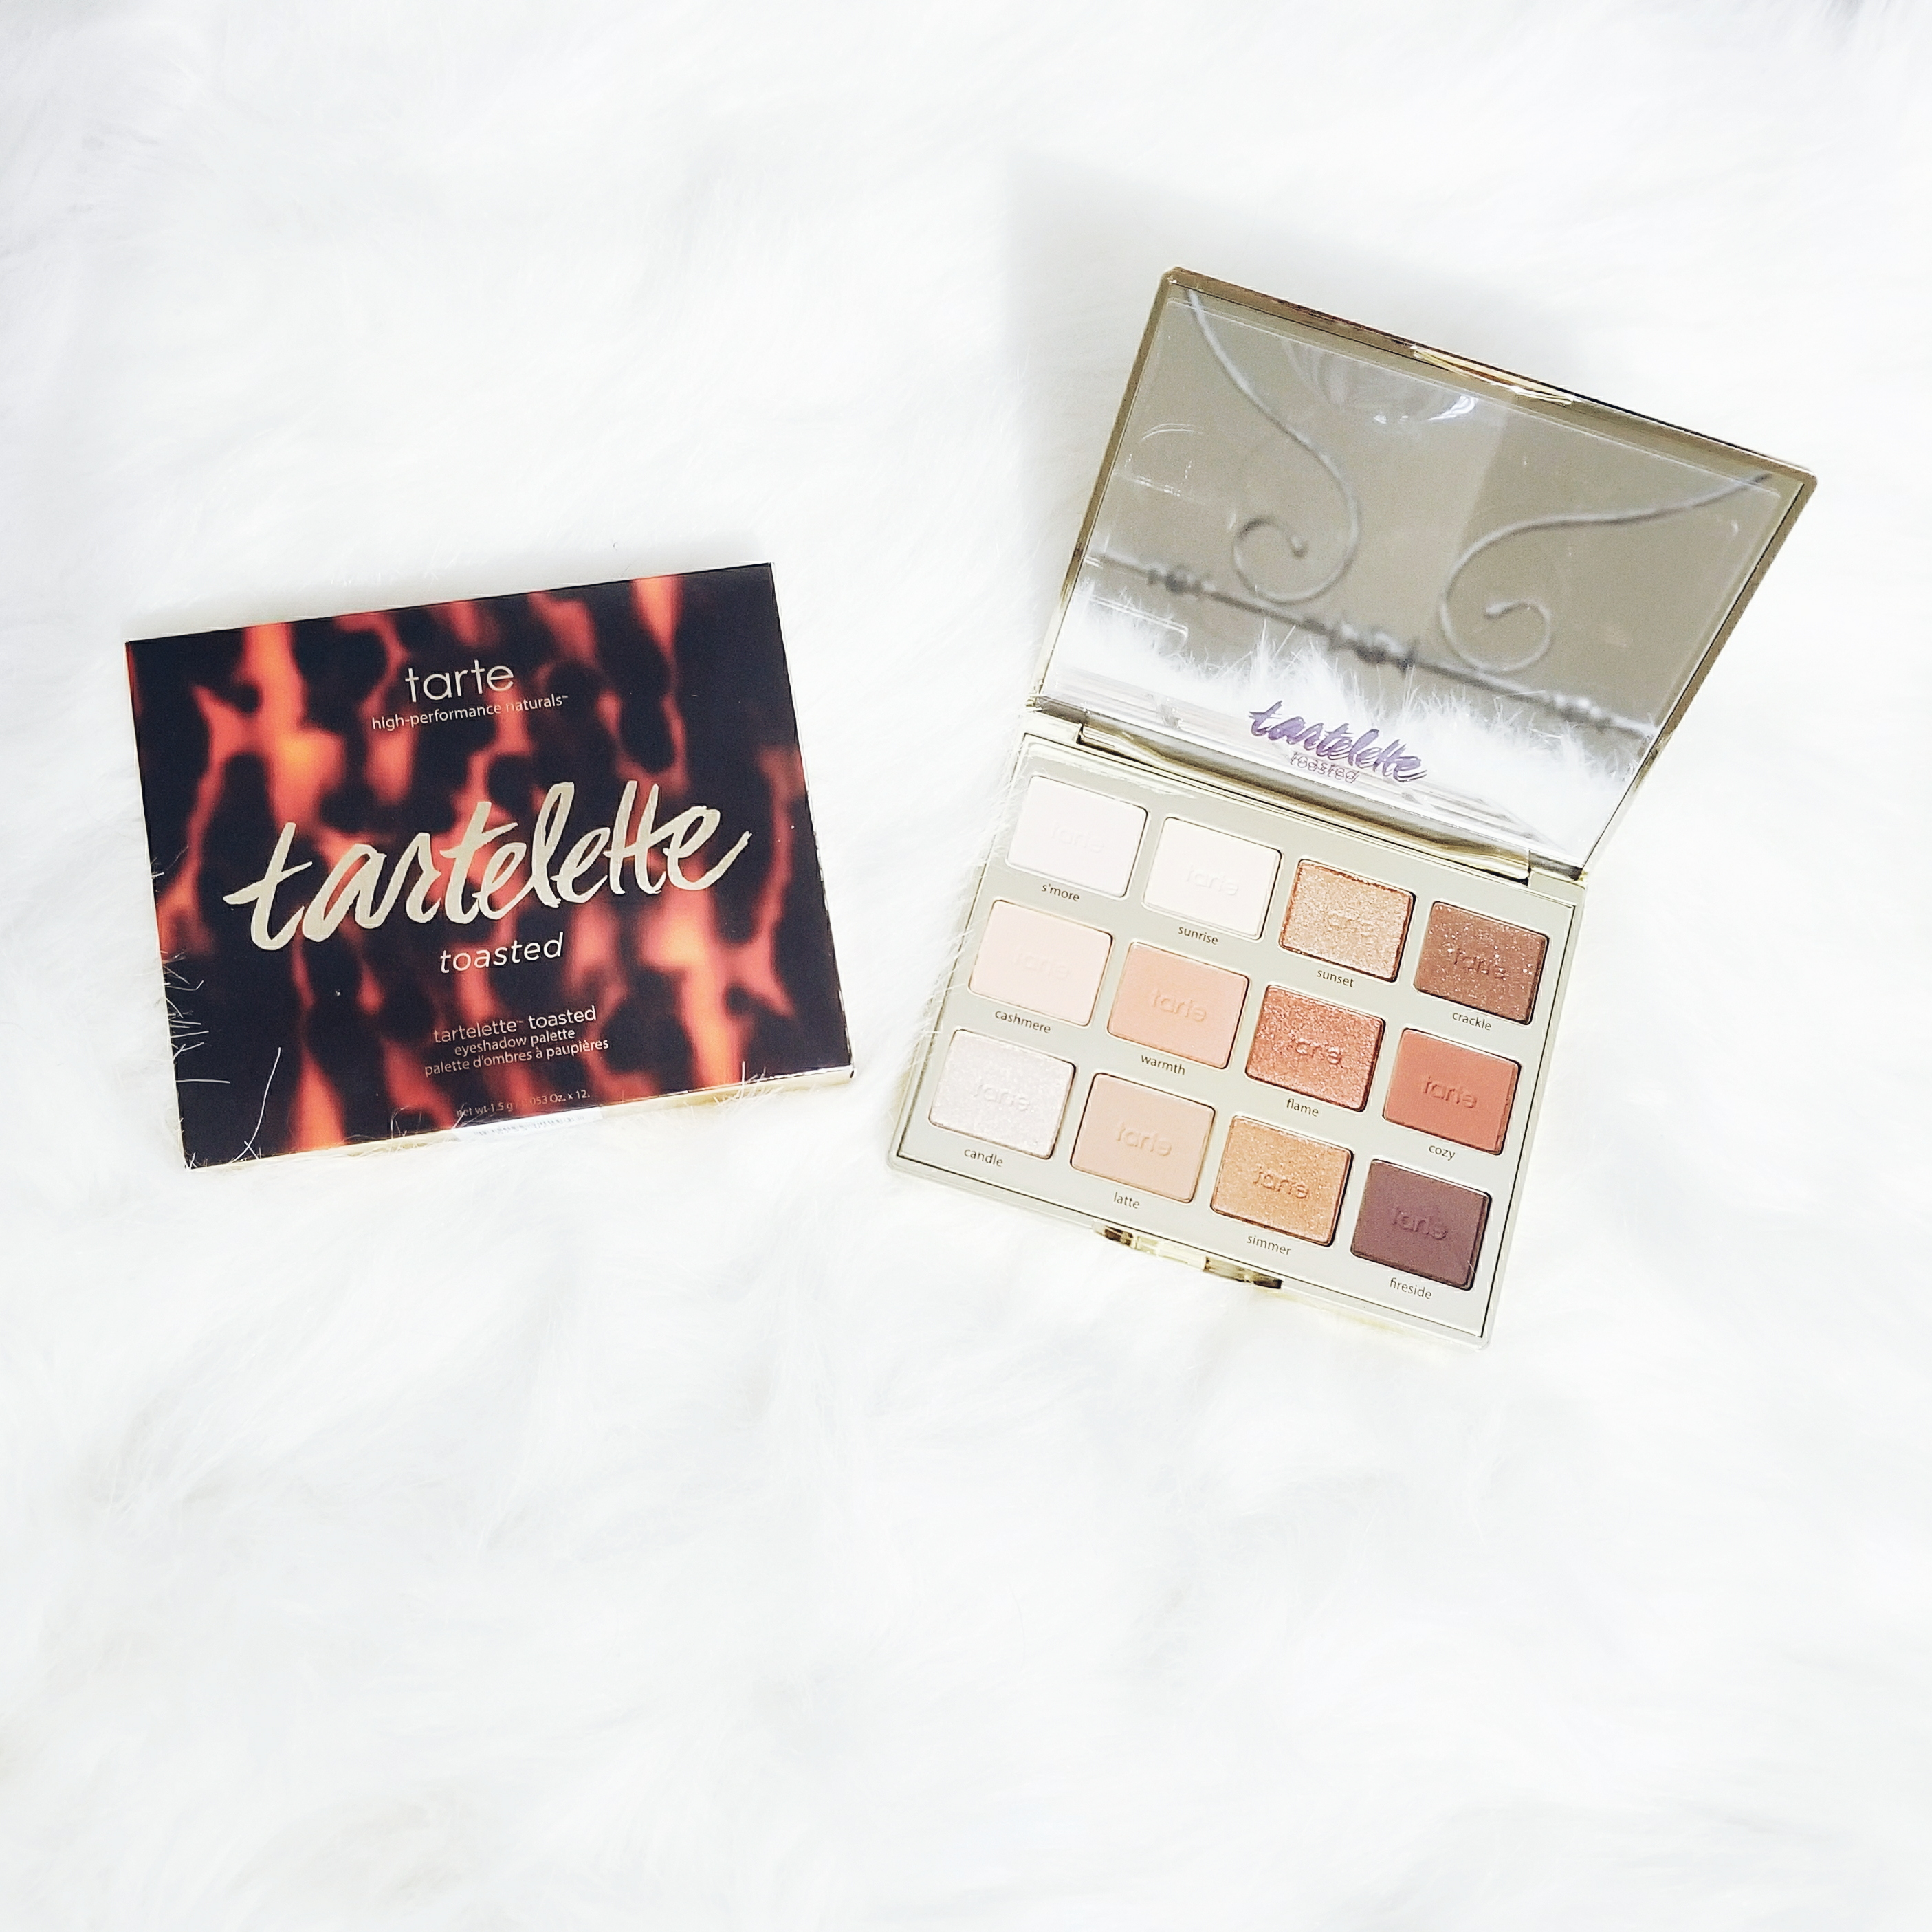 Holiday Shopping with Beauty Brands. | Ashley from LSR